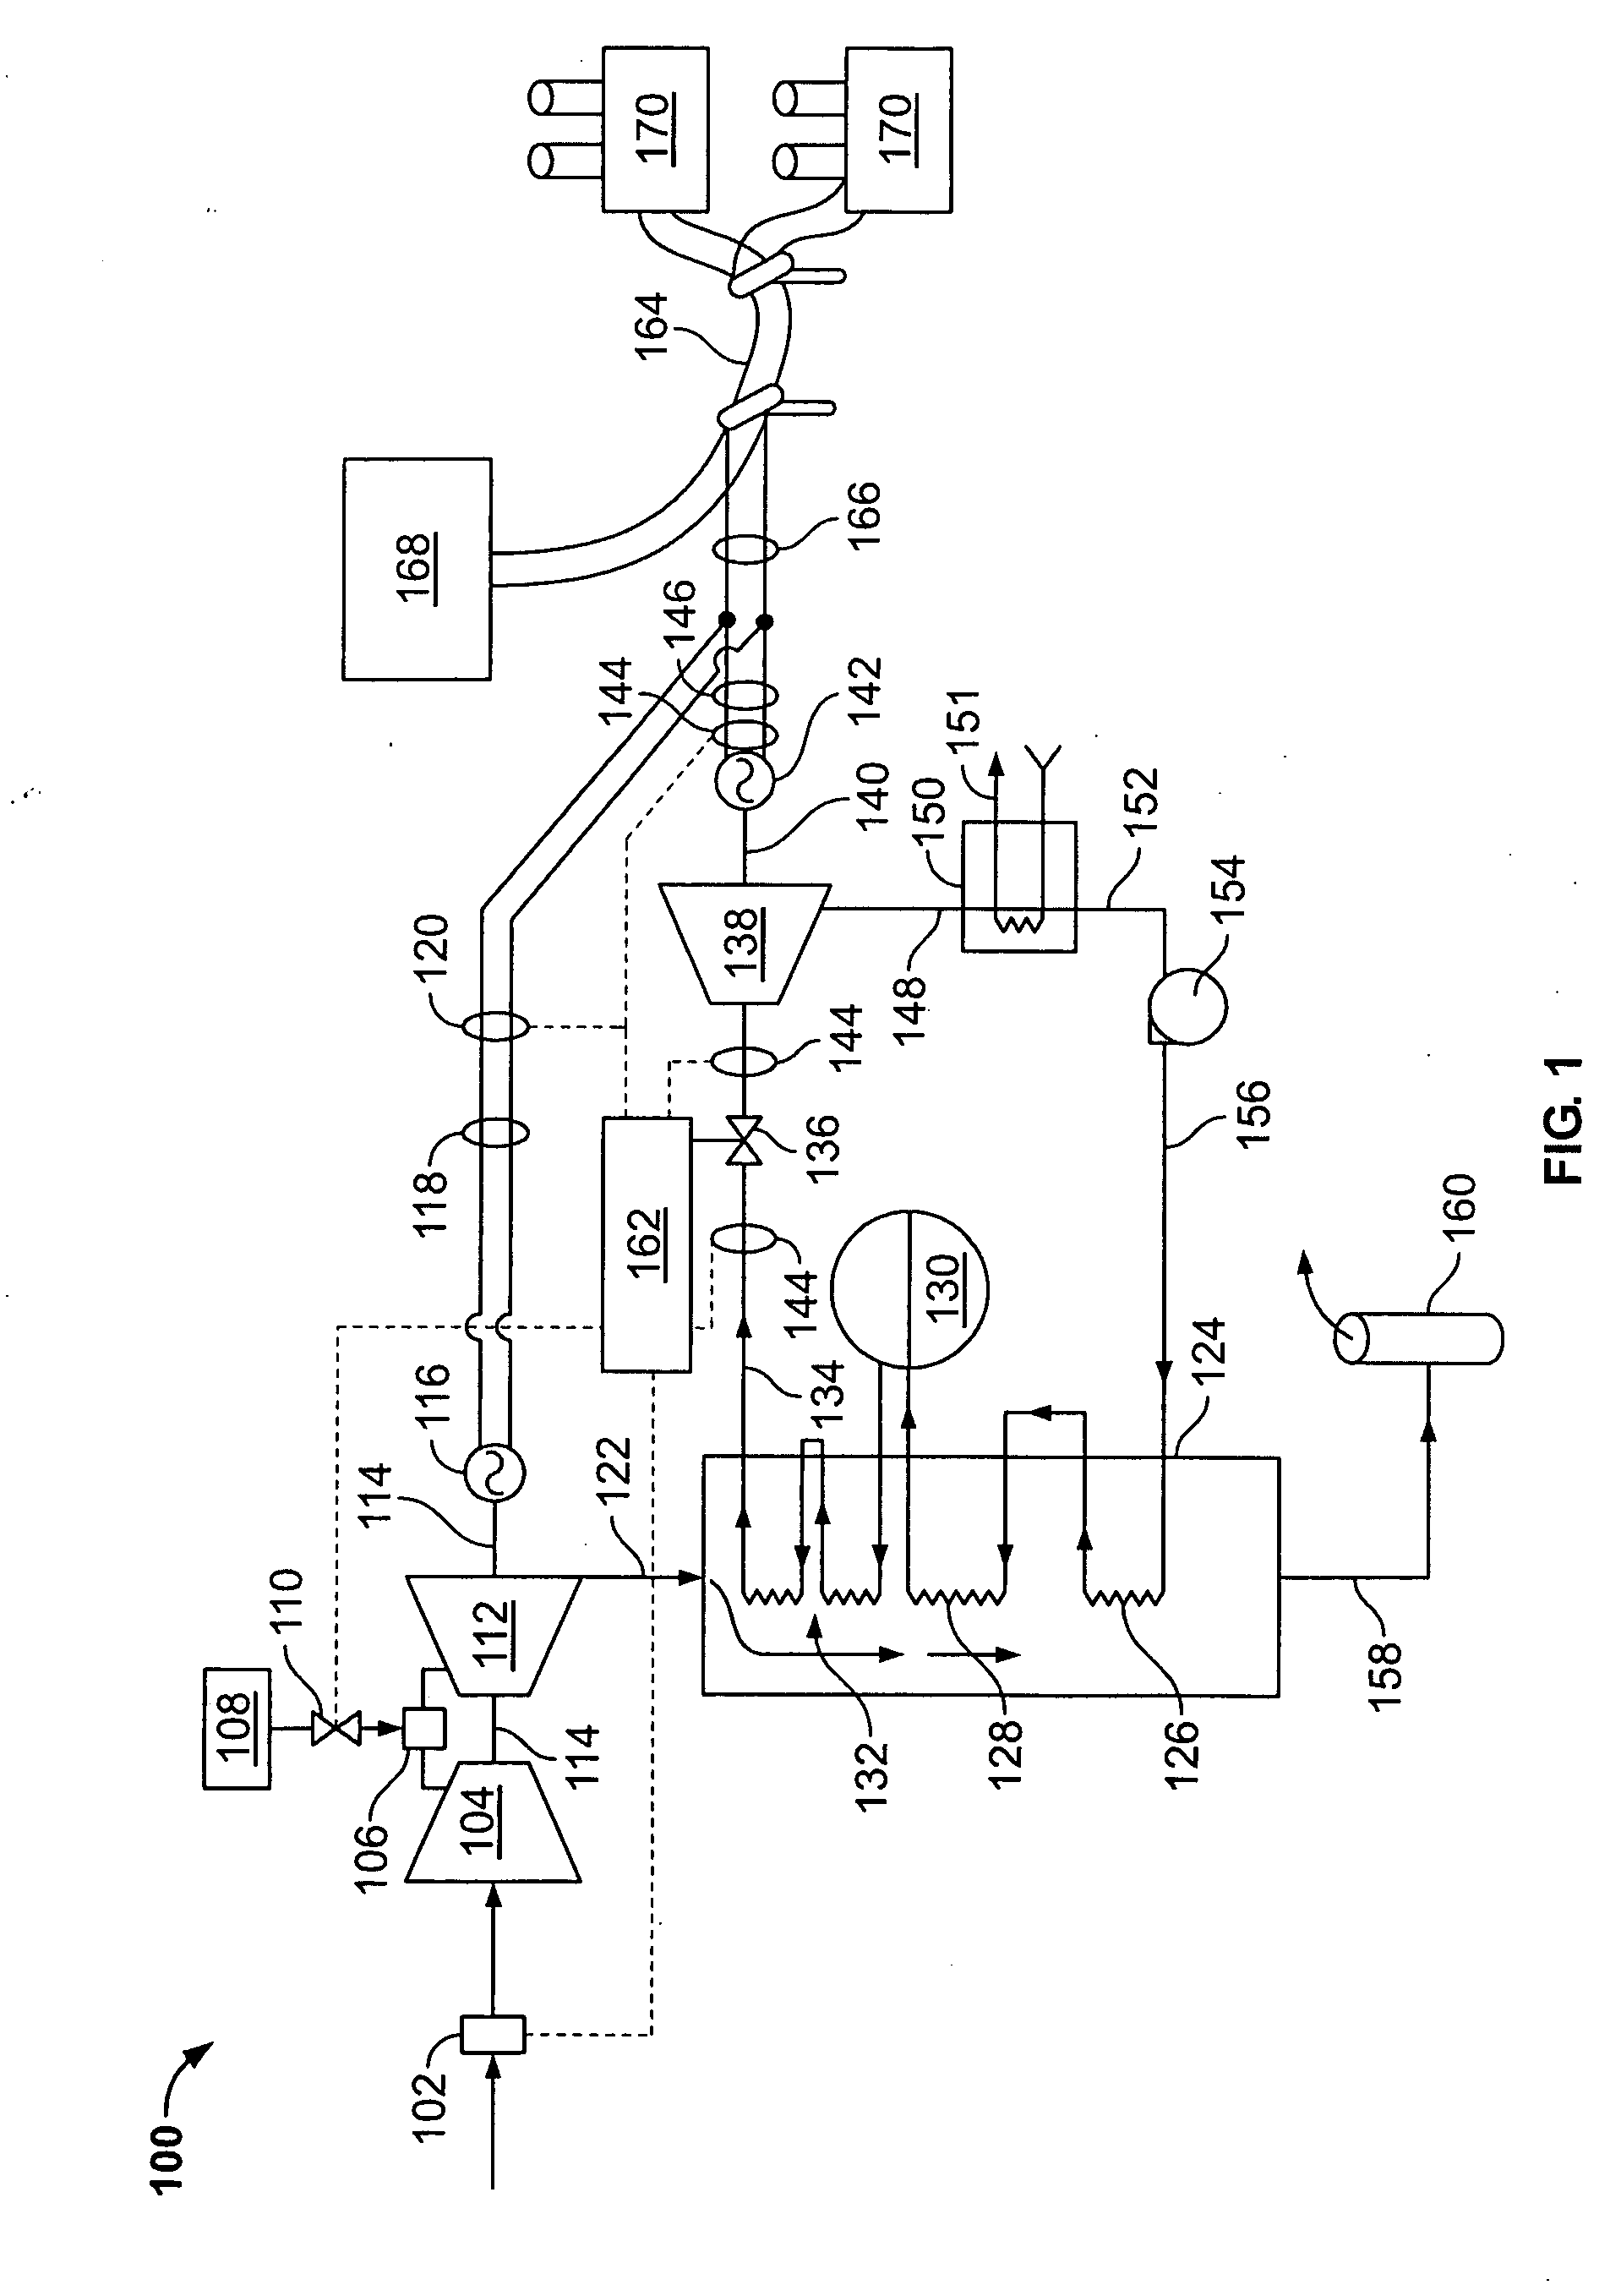 Methods and apparatus for electric power grid frequency stabilization